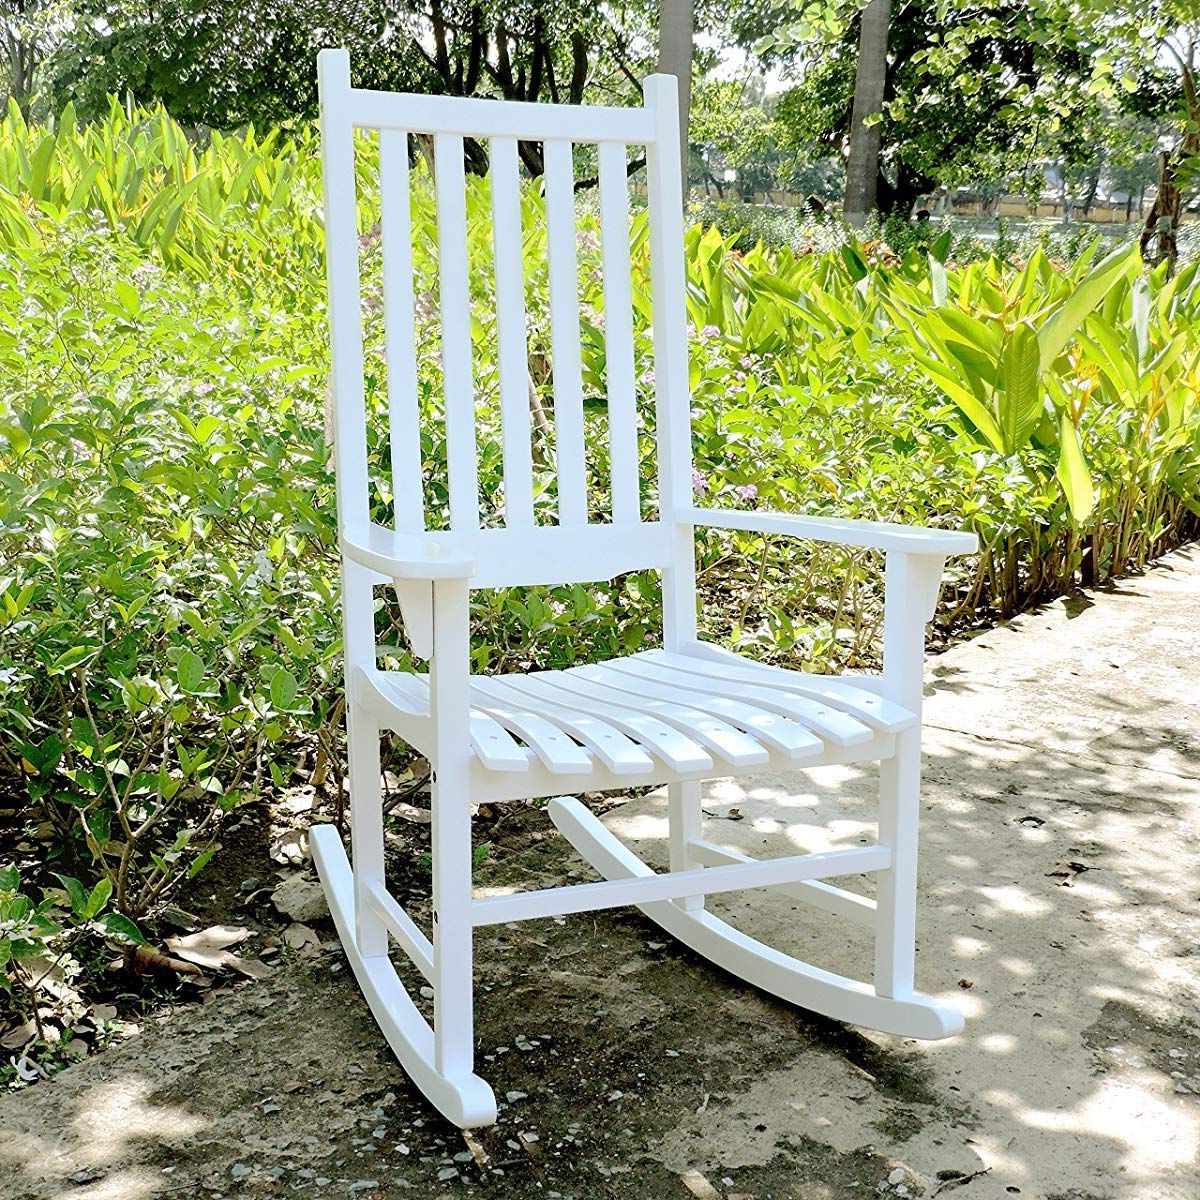 White Wood Soutdoor Seating Sets For Latest White Porch Rocker/rocking Chair Acacia Wood (View 6 of 15)